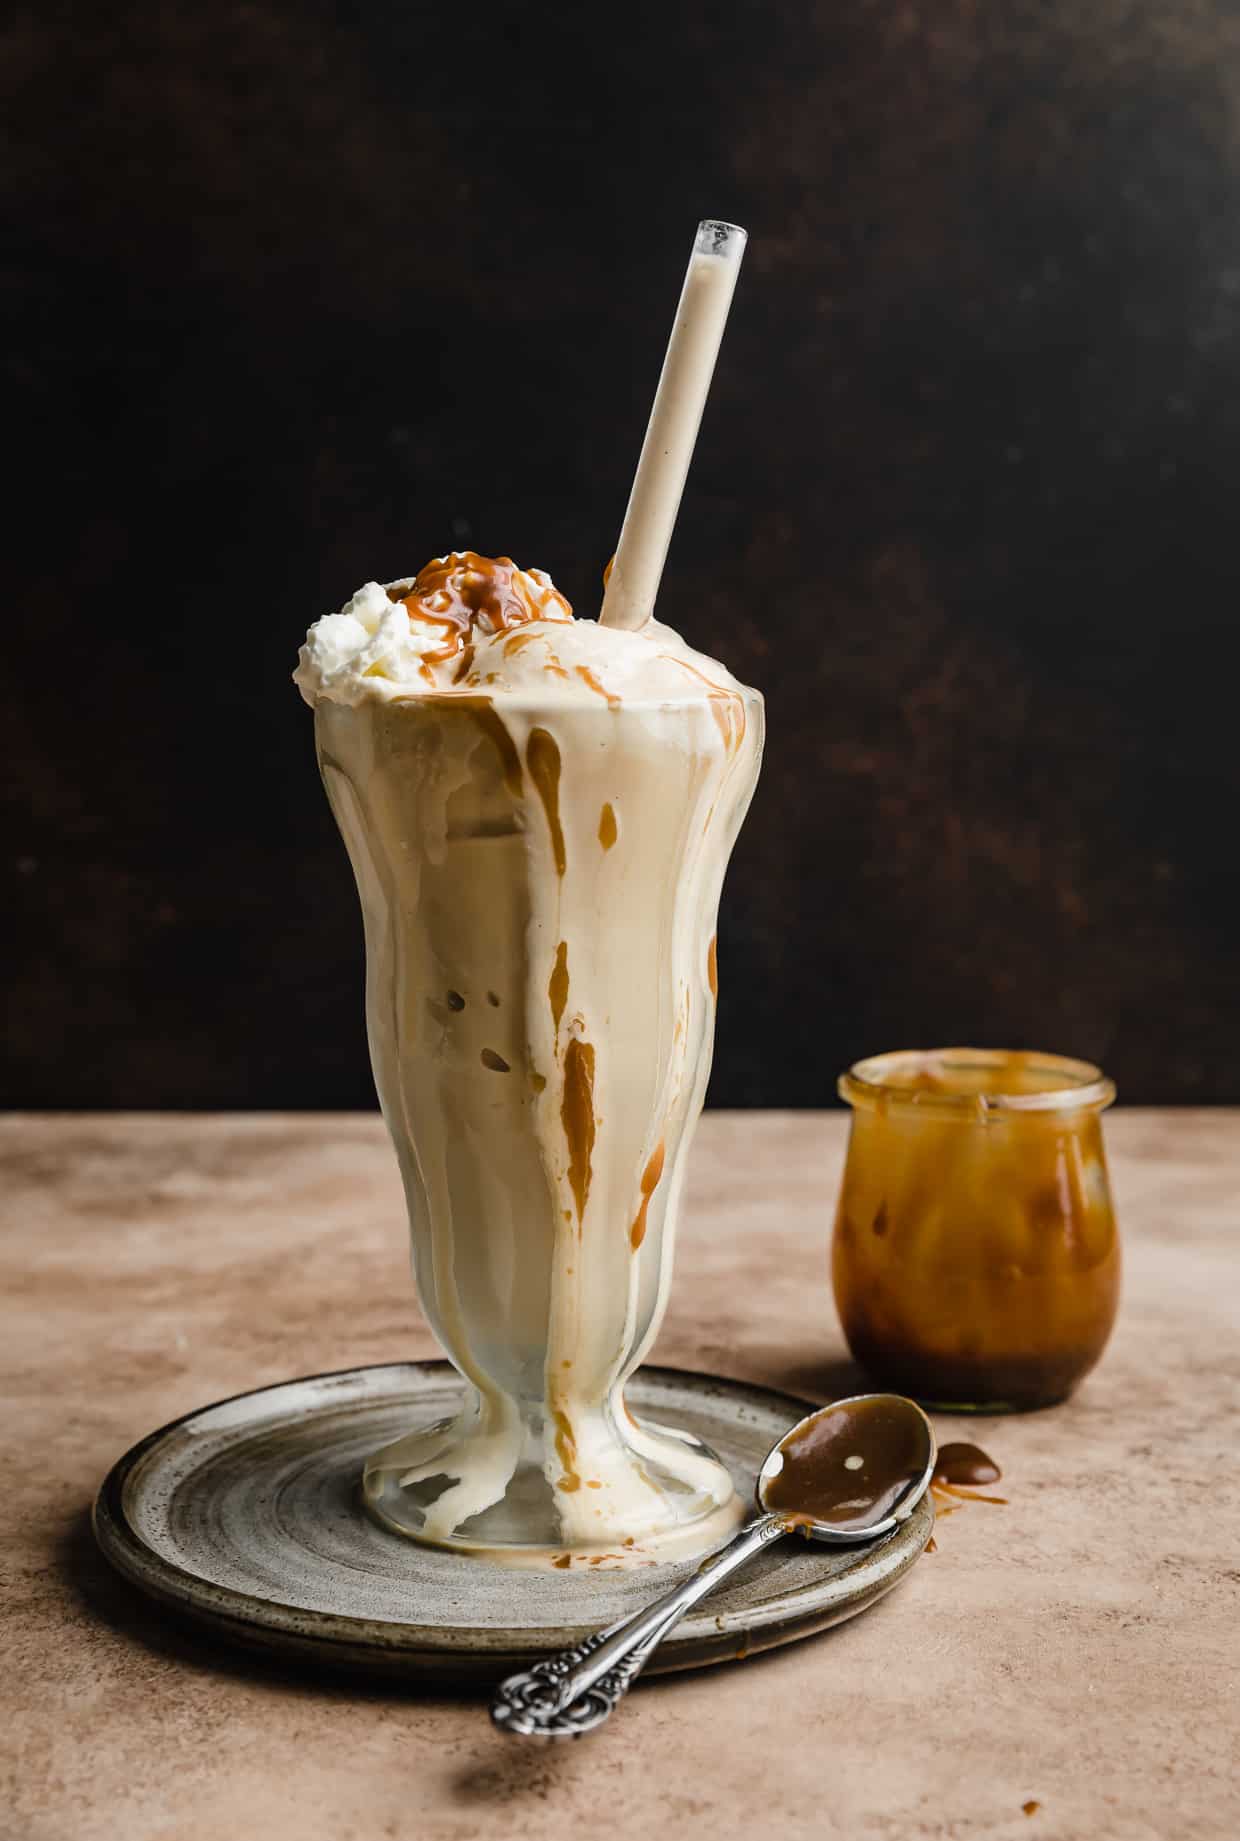 A Butterscotch Milkshake in a tall glass with a straw in it, against a brown background.